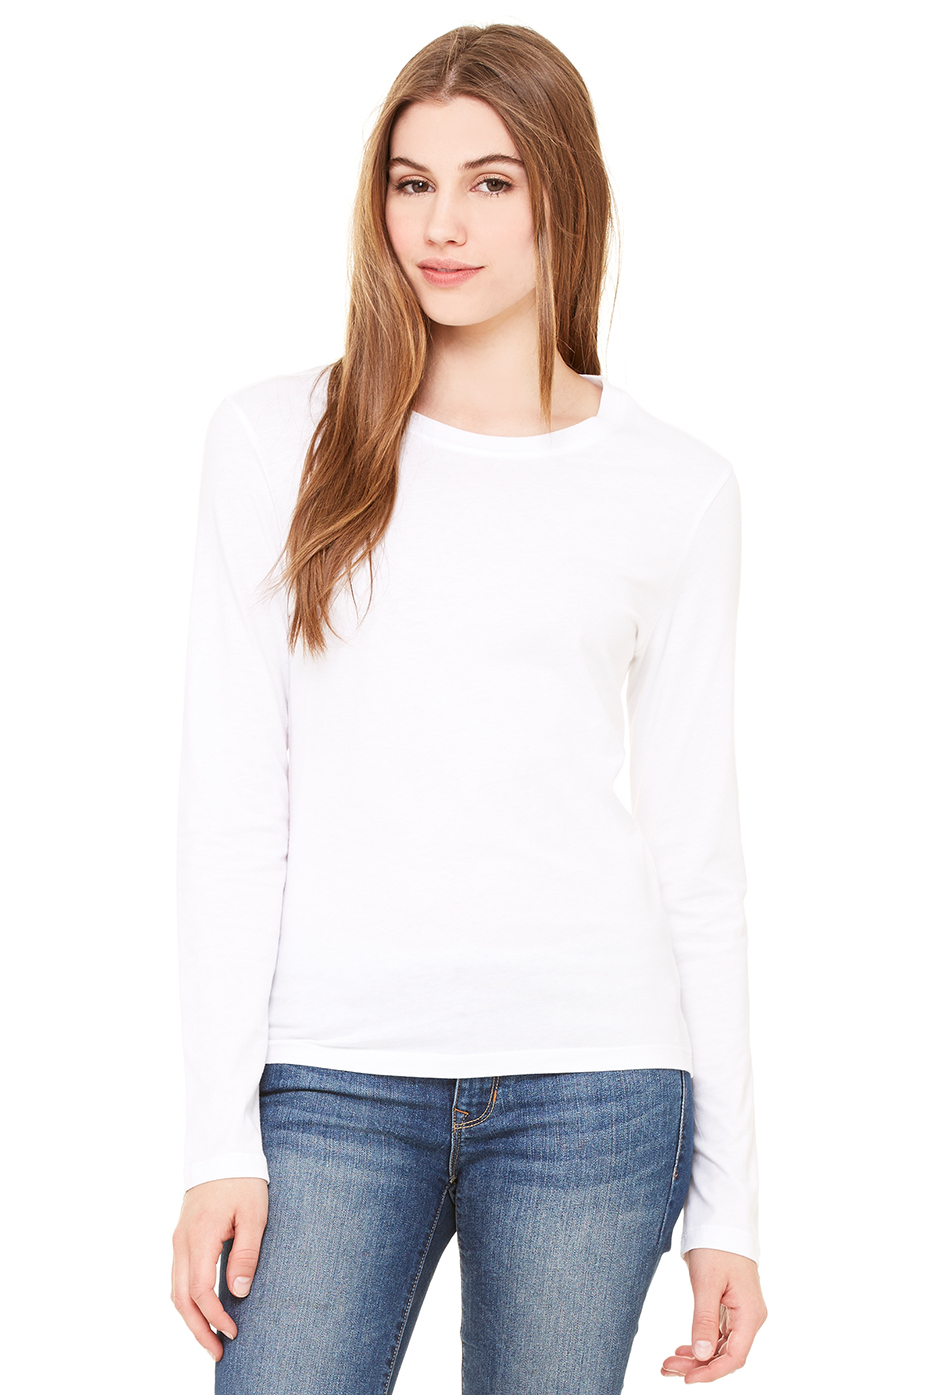 white long sleeve jersey top